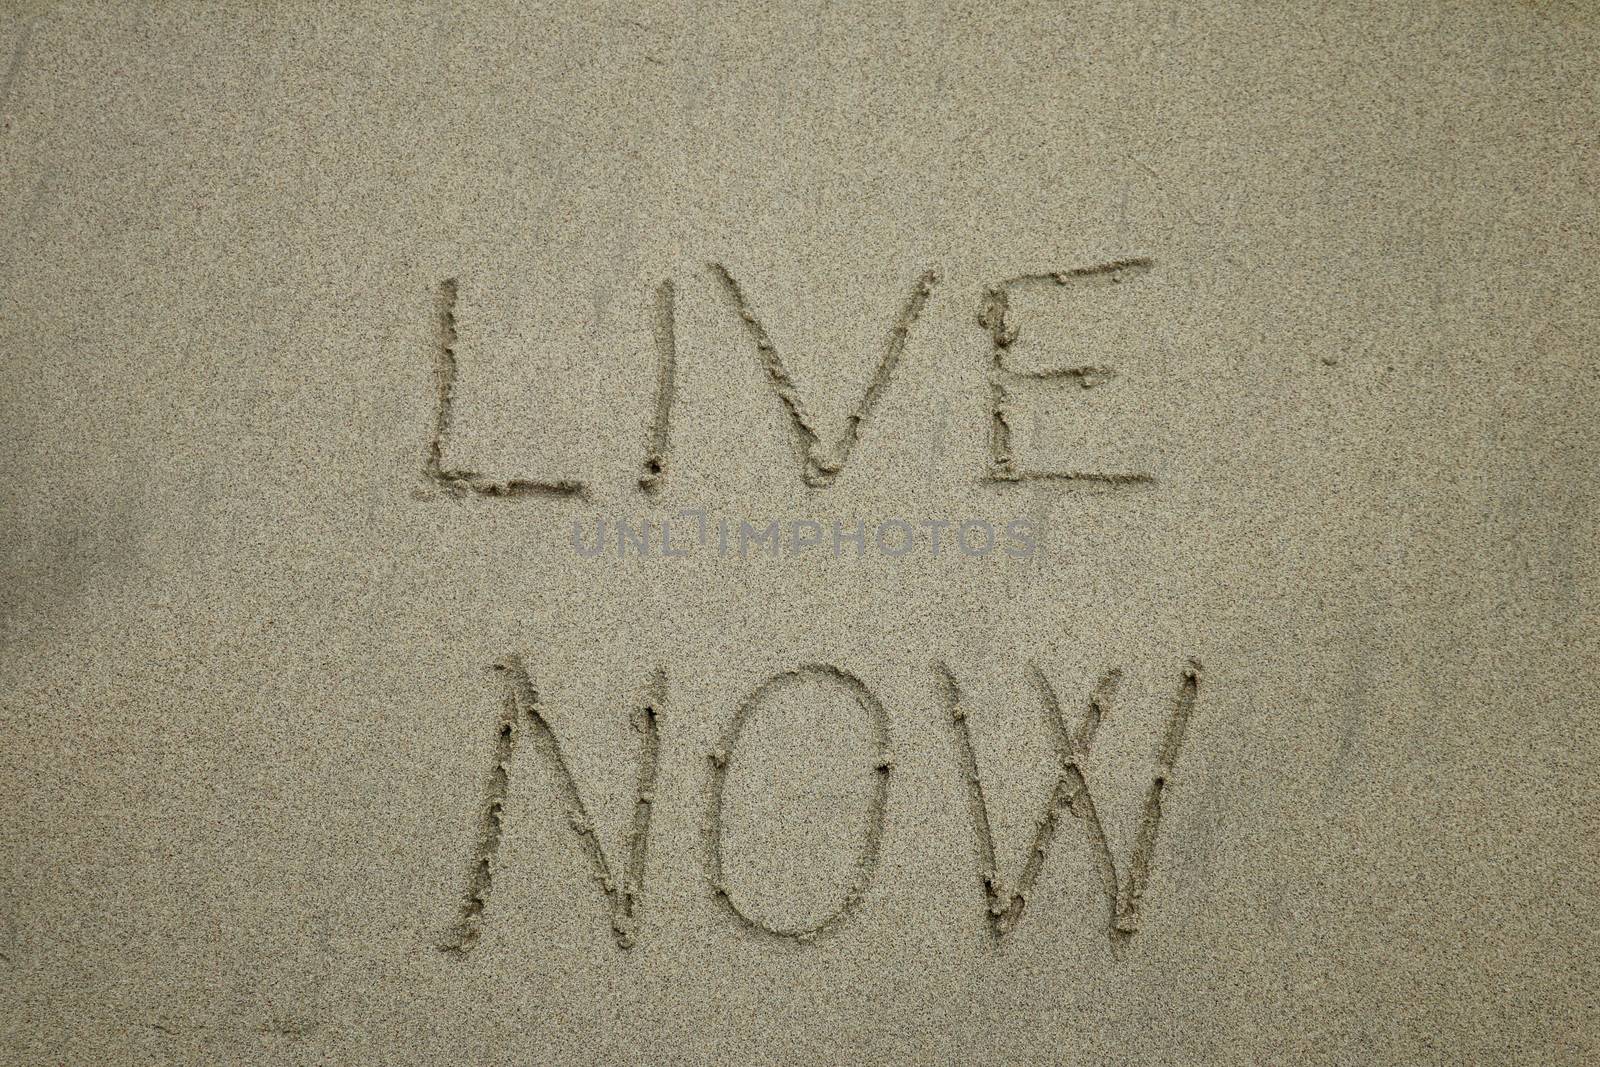 live now, mindfulness concept, text written on the sand,